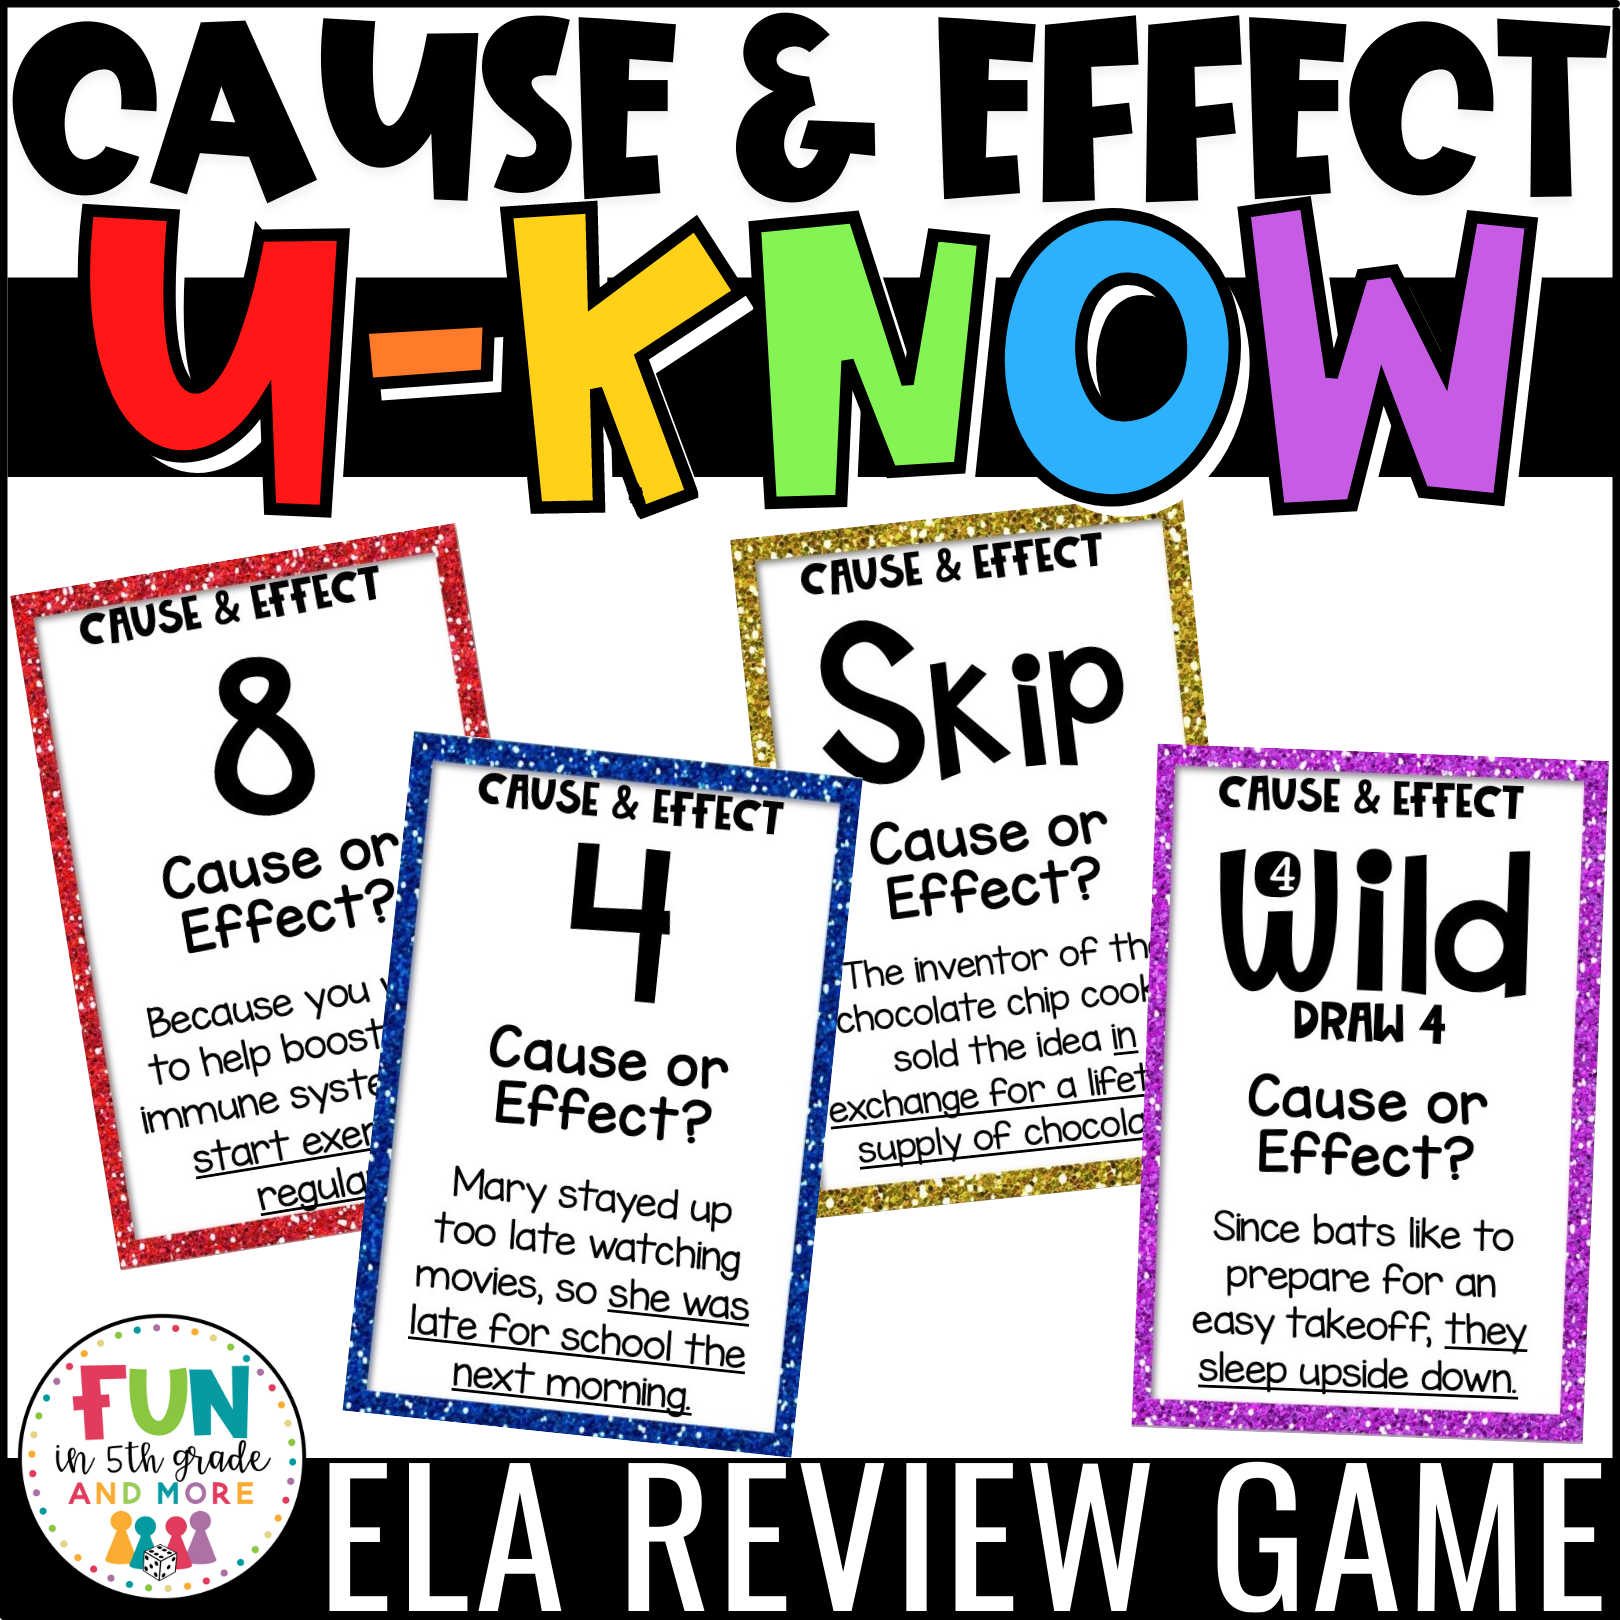 U-Know Cause and Effect Review Game